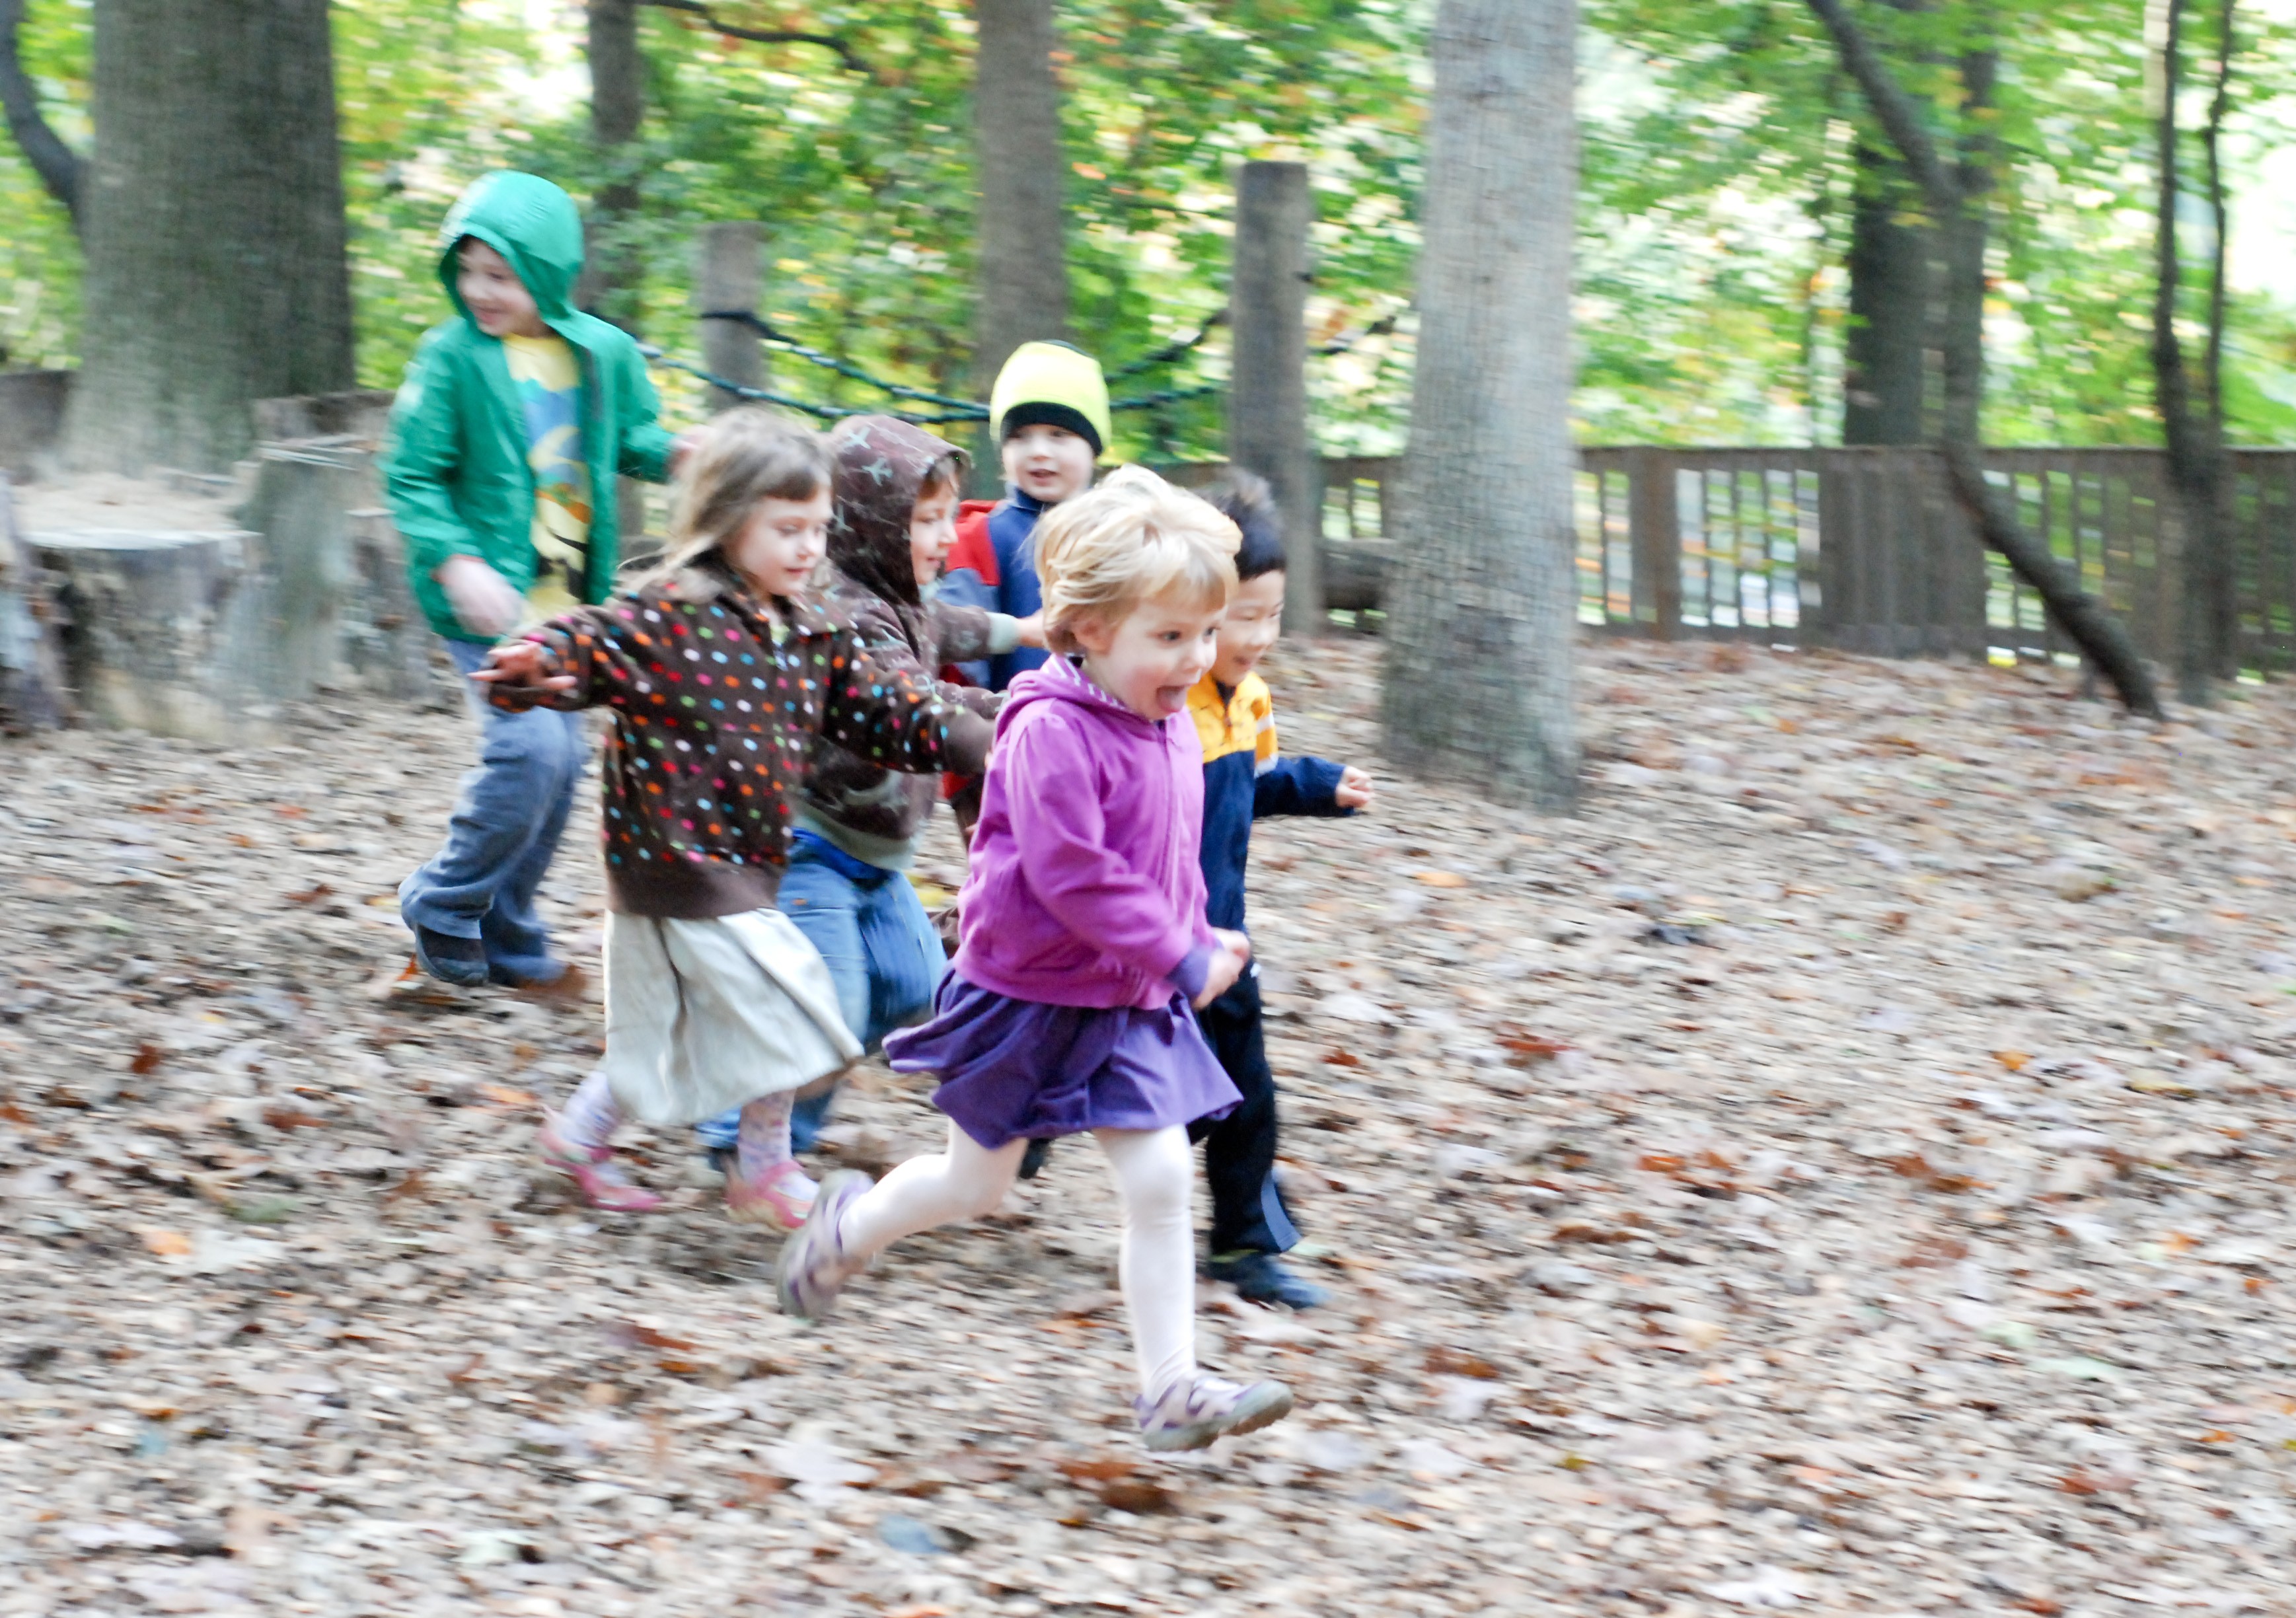 Acorn Hill in Silver Spring offers kids plenty of free play outdoors